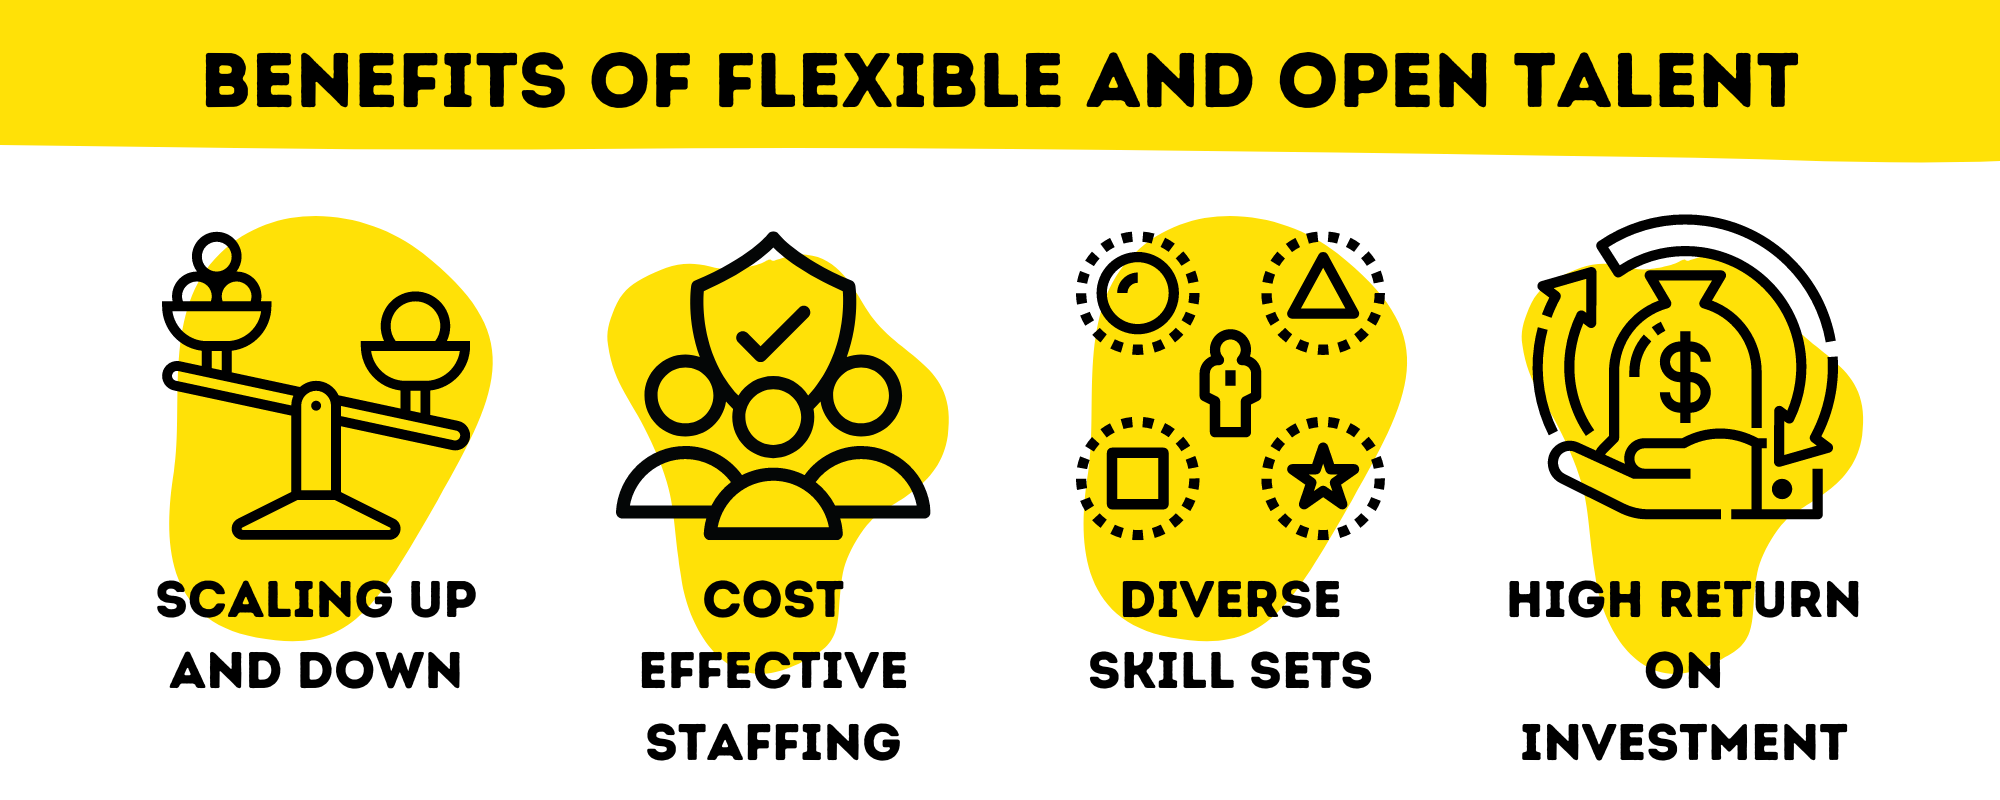 Benefits of flexible and open talent